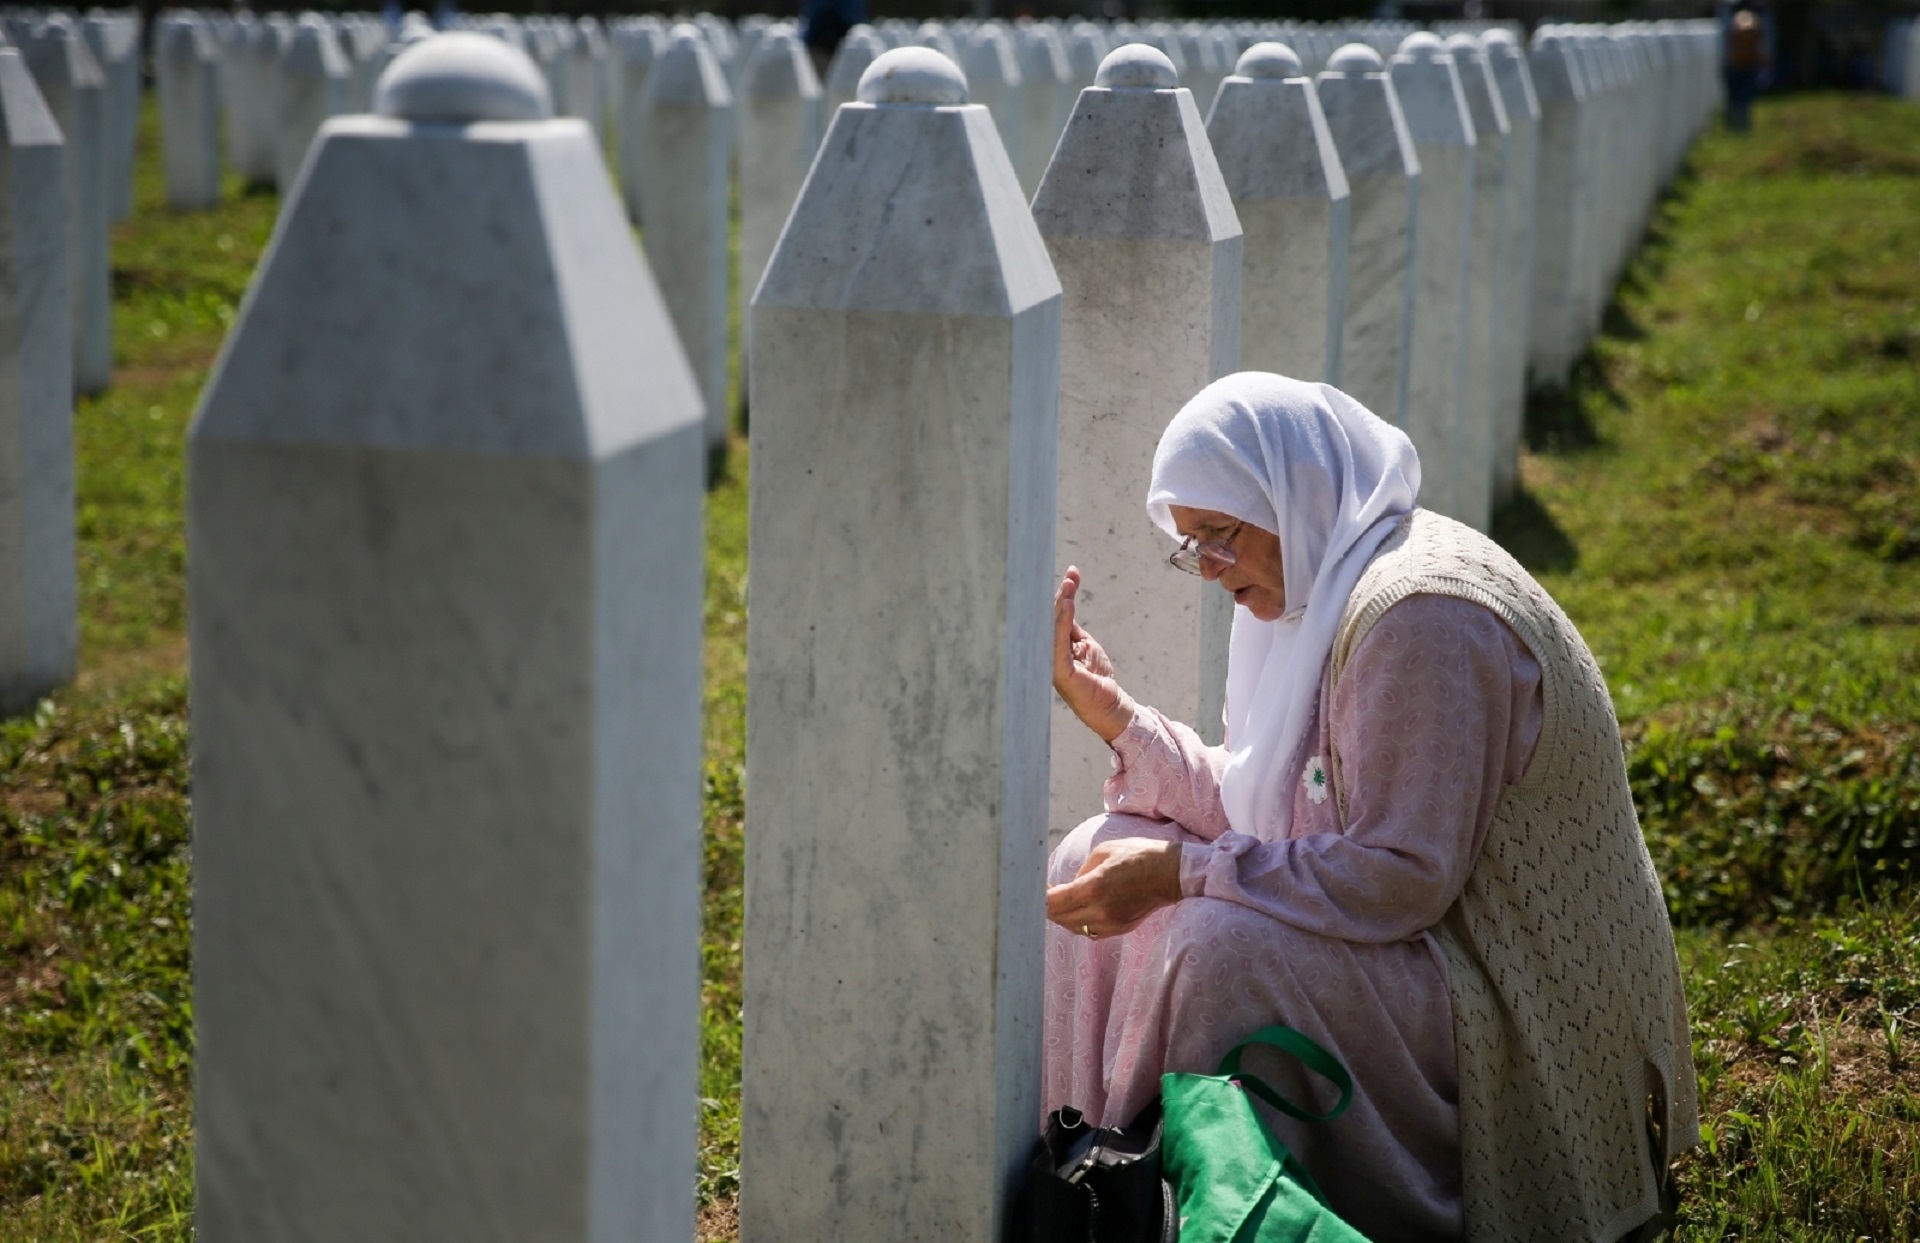 Bosnia and Herzegovina commemorates 25th anniversary of Srebrenica massacre, in Potocari A woman prays at a graveyard, ahead of a mass funeral in Potocari near Srebrenica, Bosnia and Herzegovina July 11, 2020. Bosnia marks the 25th anniversary of the massacre of more than 8,000 Bosnian Muslim men and boys, with many relatives unable to attend due to the coronavirus disease (COVID-19) outbreak. REUTERS/Dado Ruvic DADO RUVIC